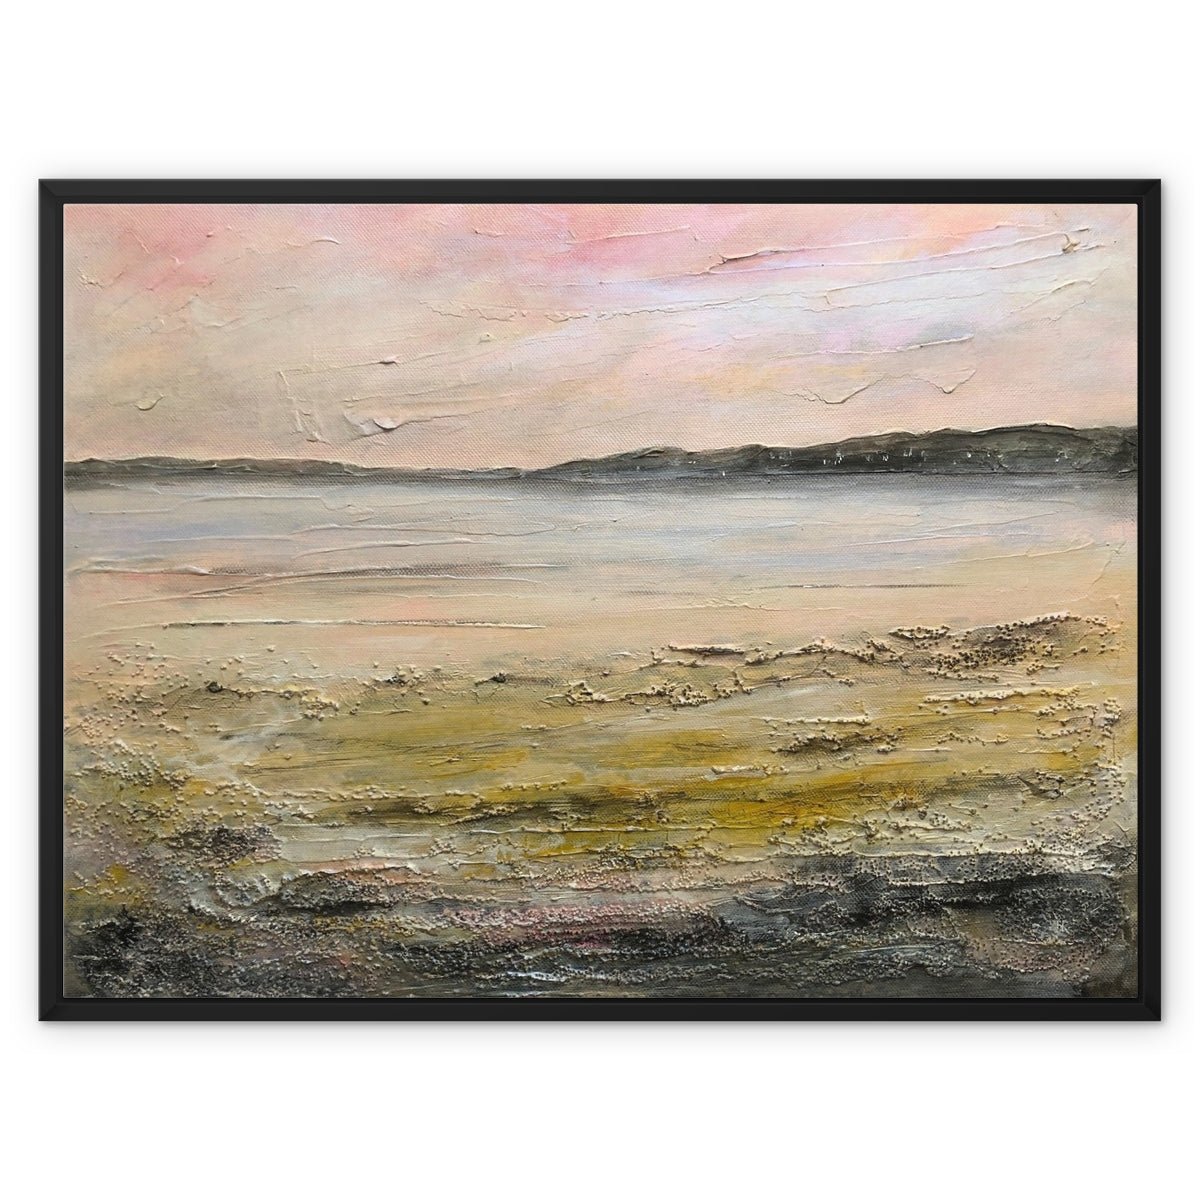 Sandgreen Painting | Framed Canvas From Scotland-Floating Framed Canvas Prints-Scottish Highlands & Lowlands Art Gallery-32"x24"-Paintings, Prints, Homeware, Art Gifts From Scotland By Scottish Artist Kevin Hunter